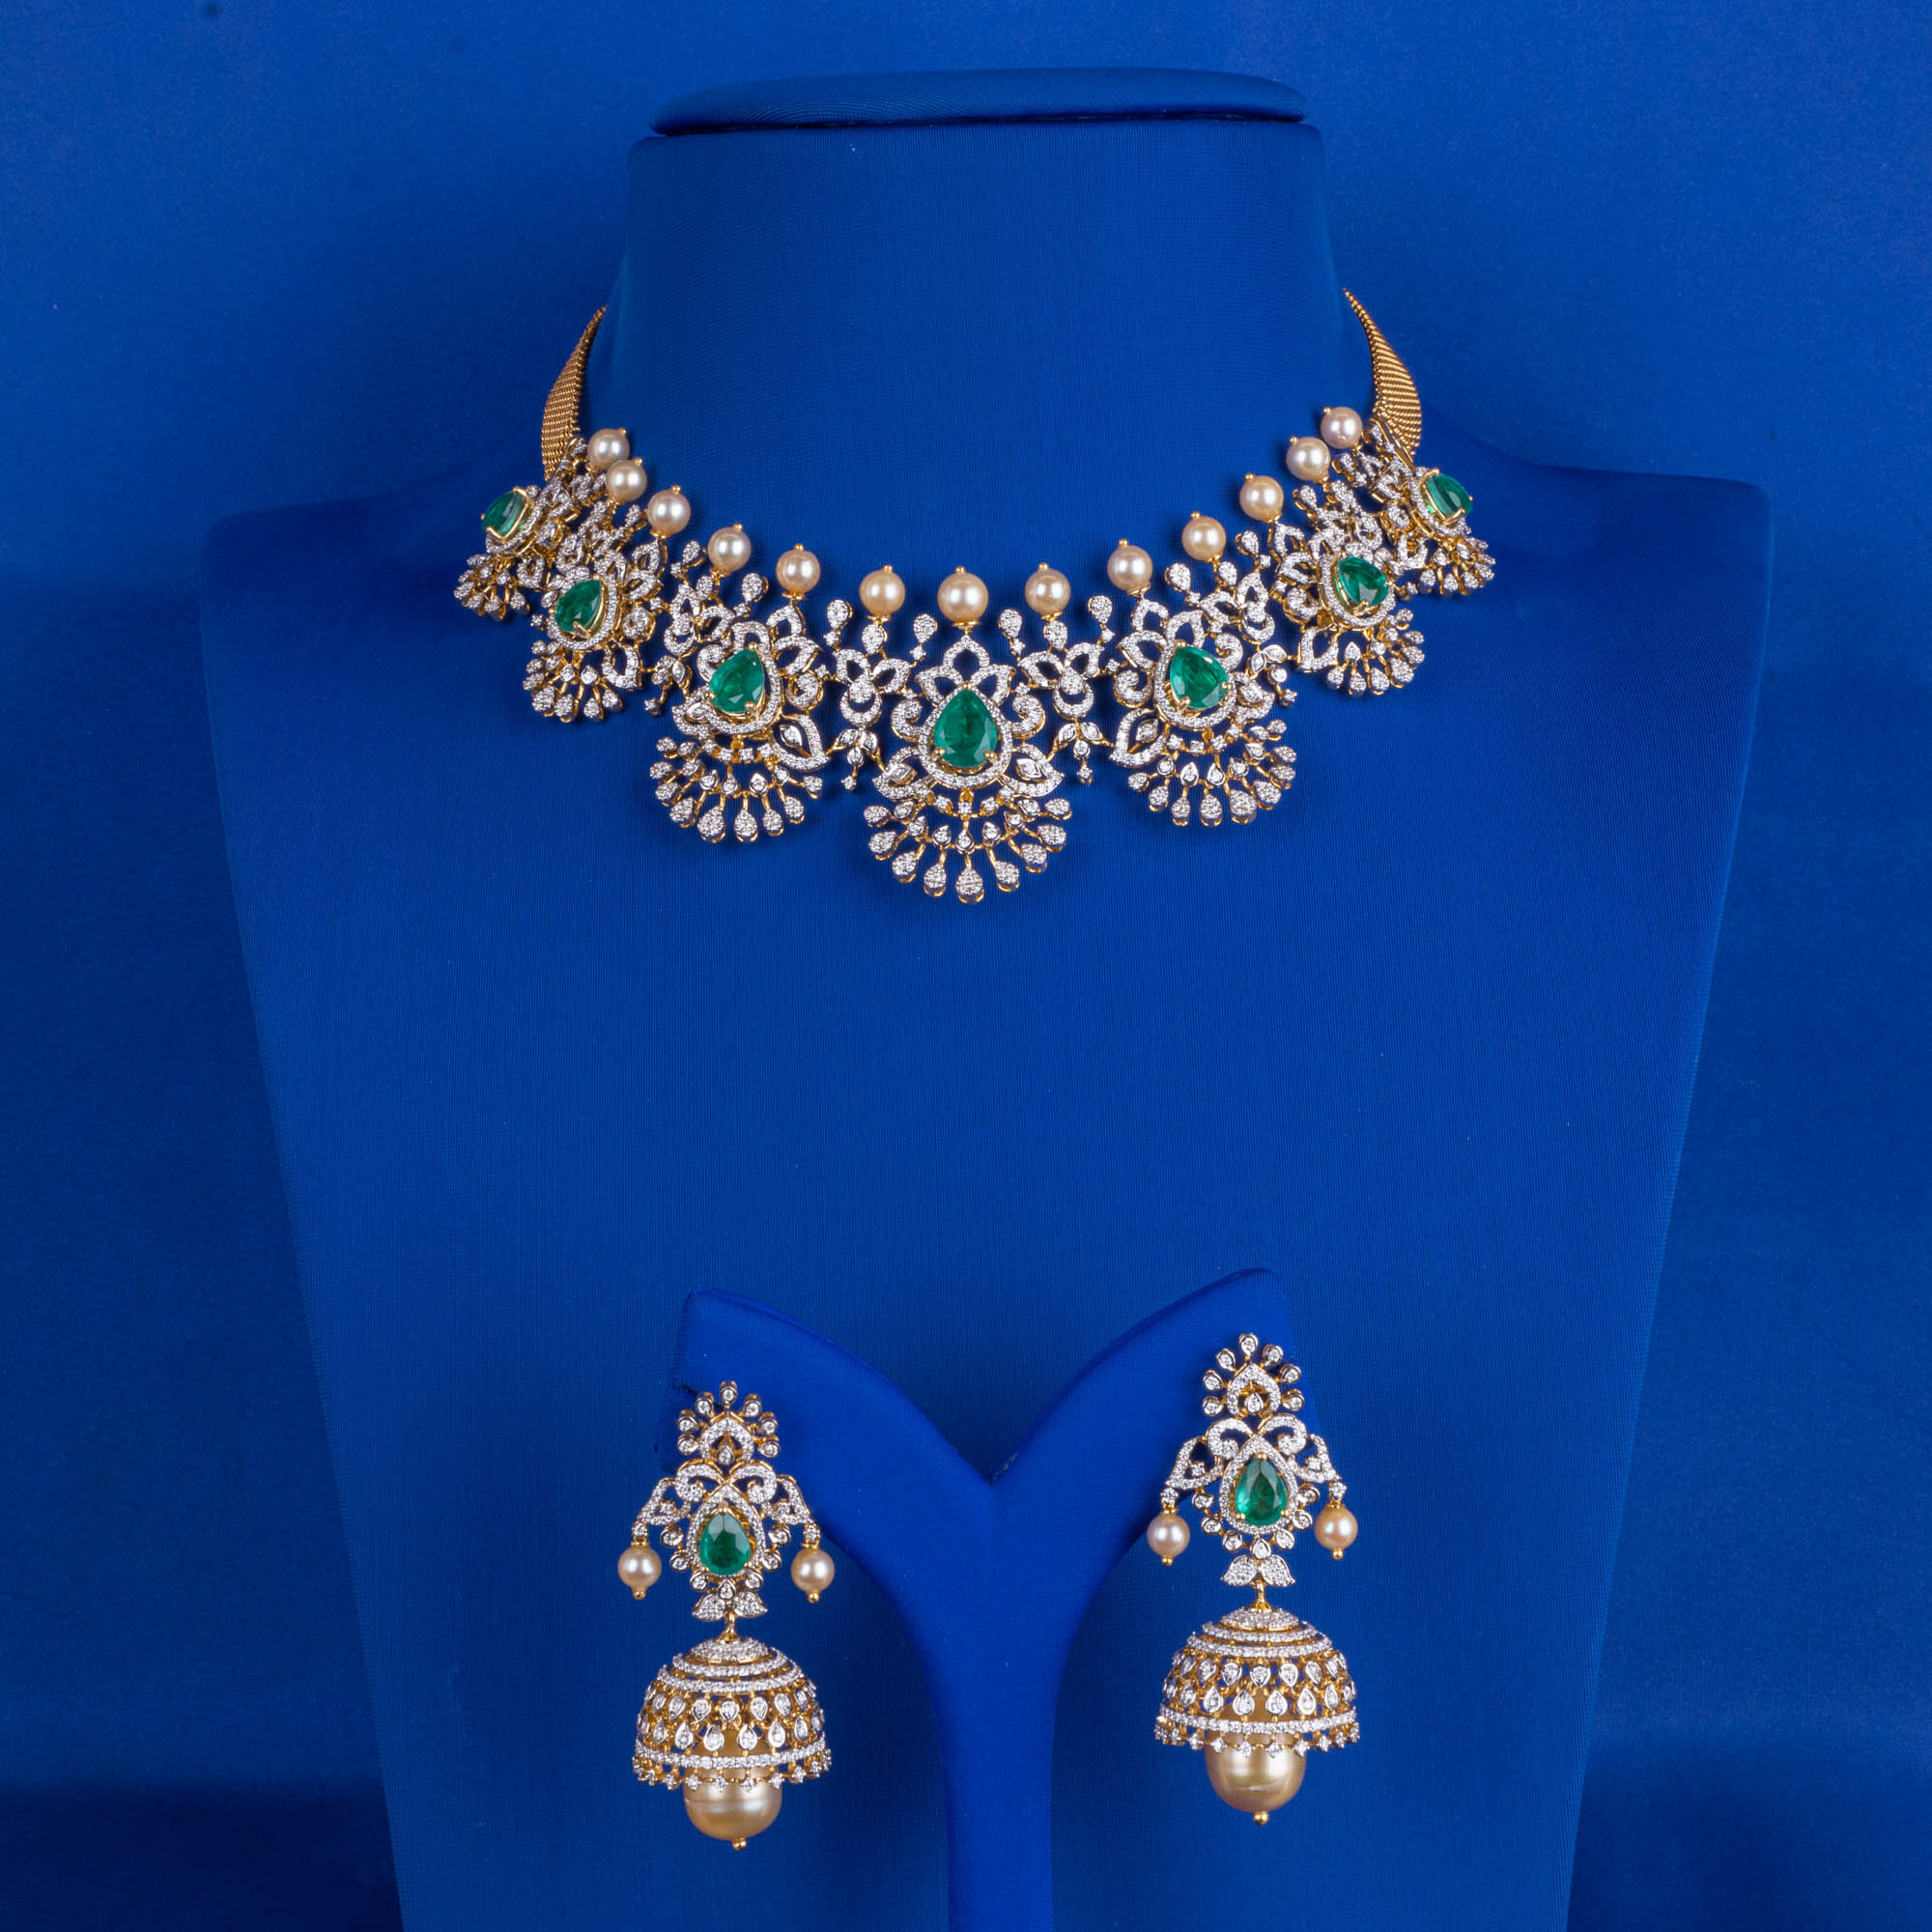 Handmade 18K Yellow Gold Diamond Neckalce and Earrings with Emeralds and Pearls